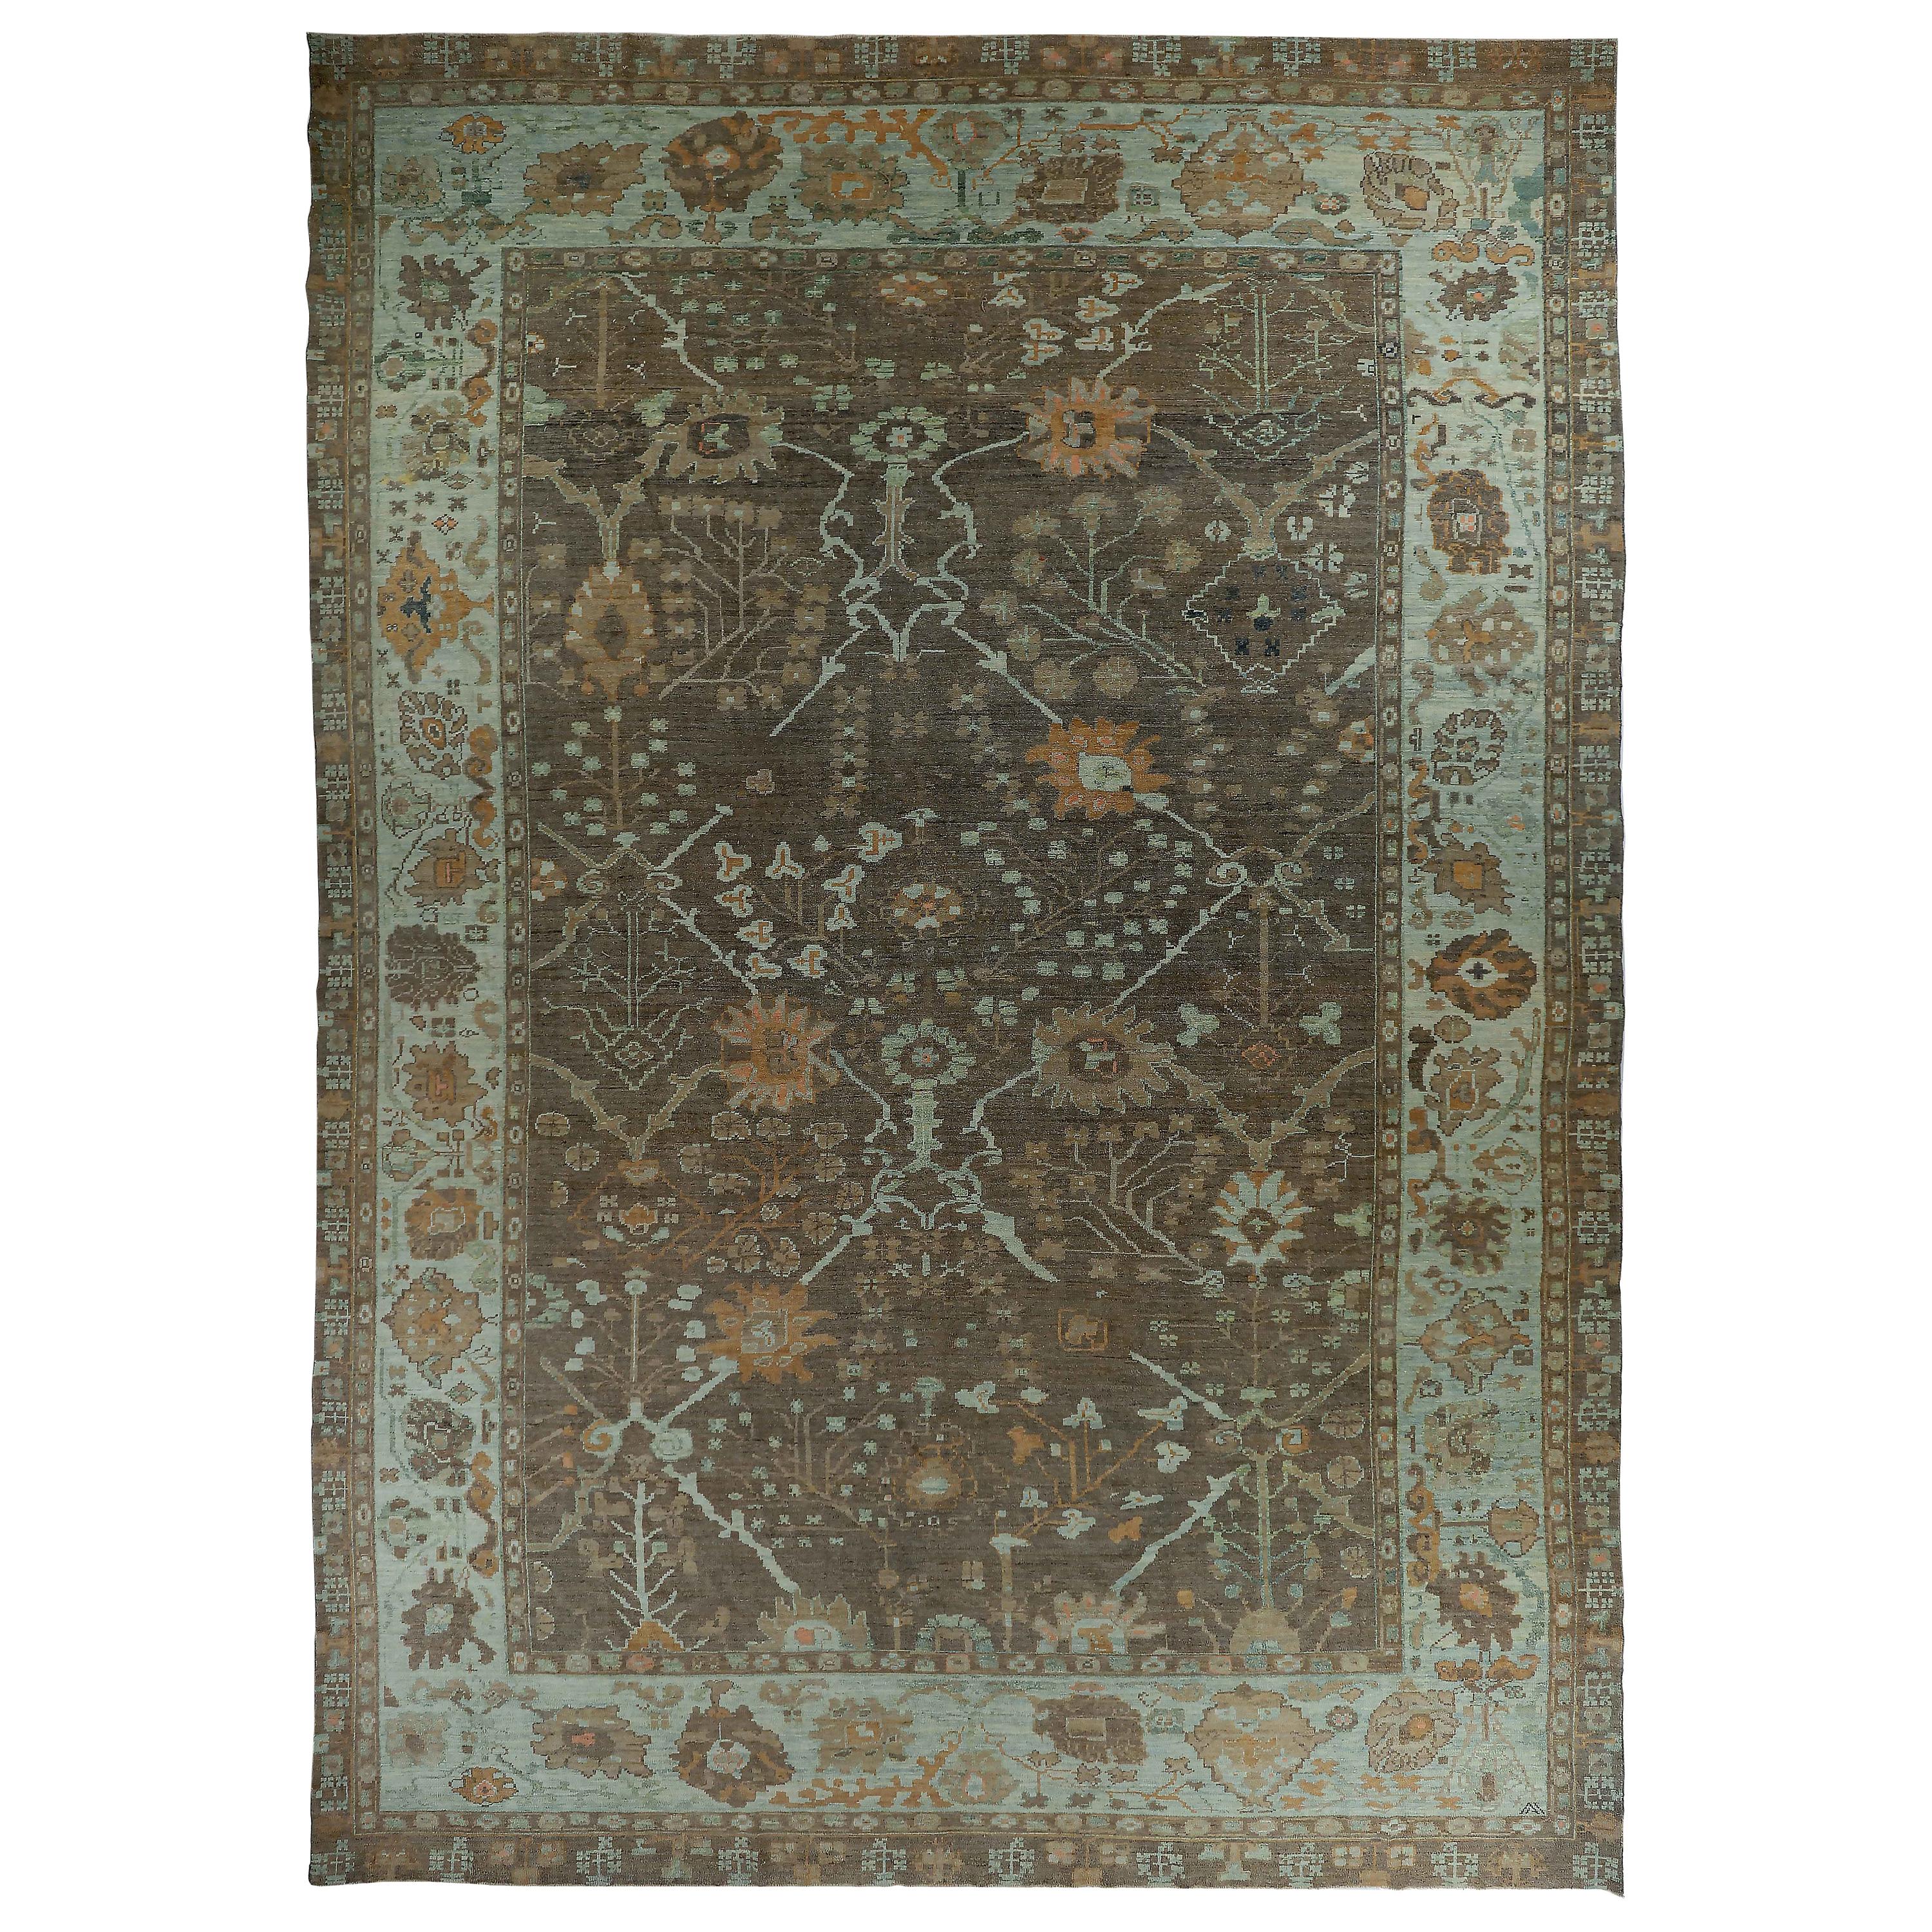 New Oversize Turkish Oushak Rug with Brown and Green Floral Details For Sale